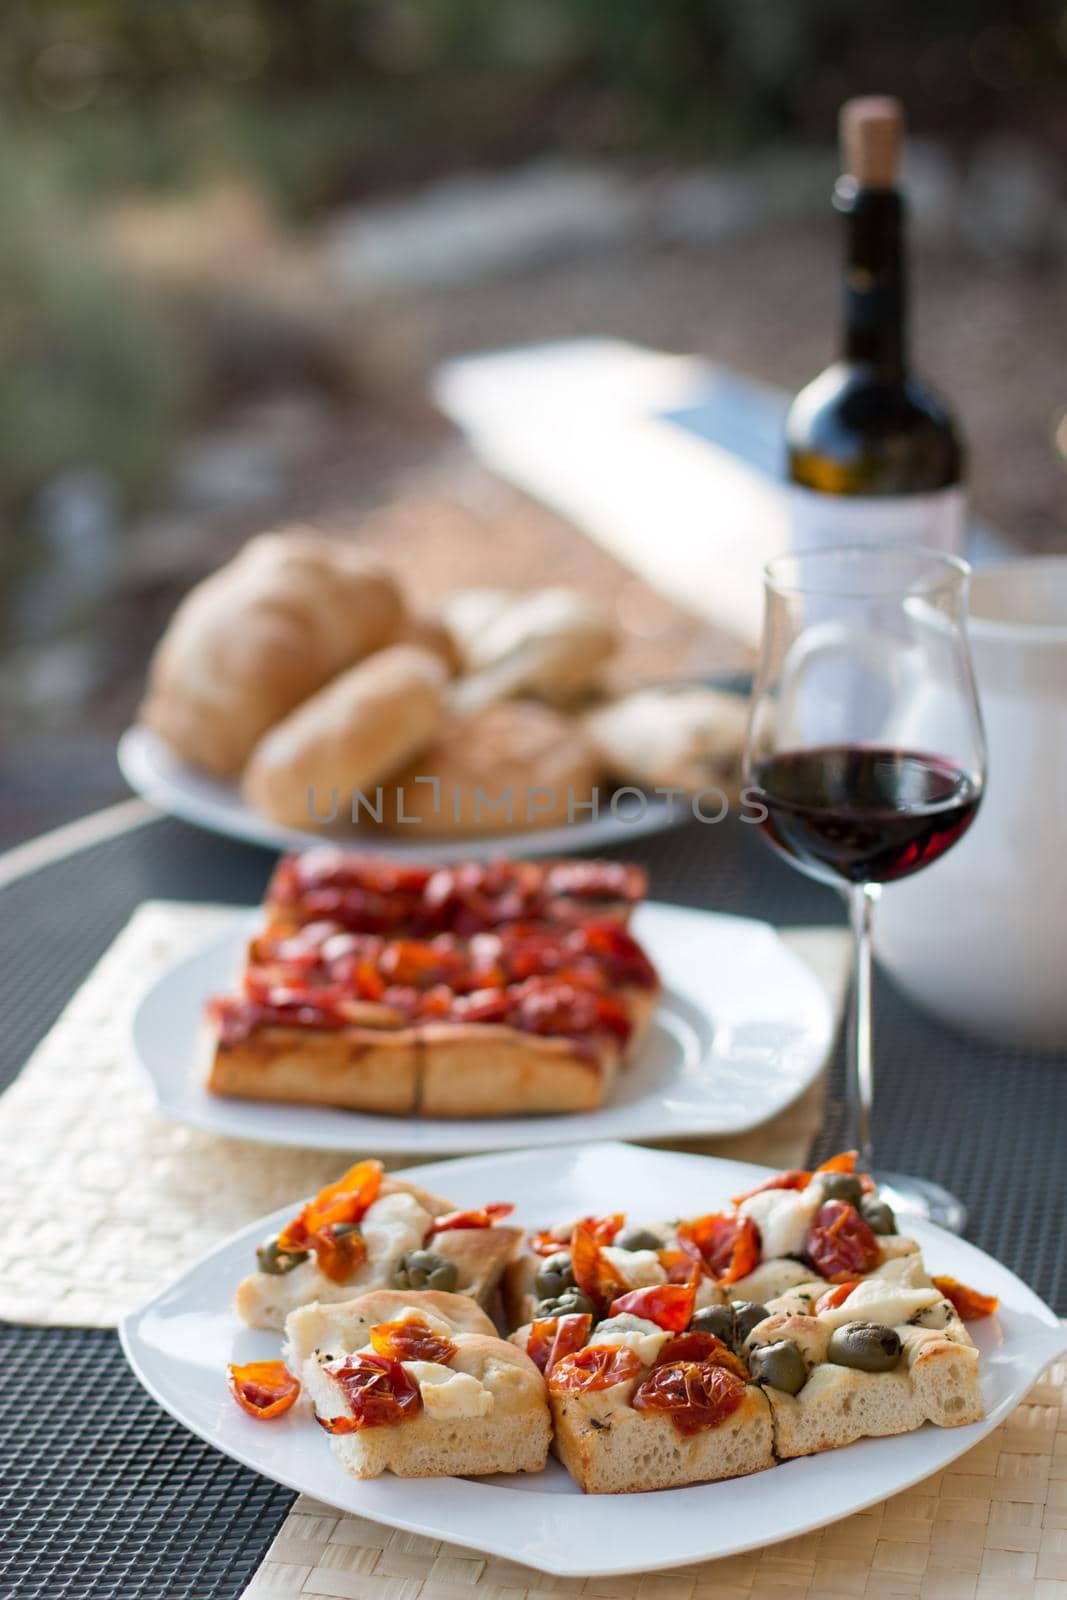 Italian Dinner with red wine, pizza and bread outside. Vacation